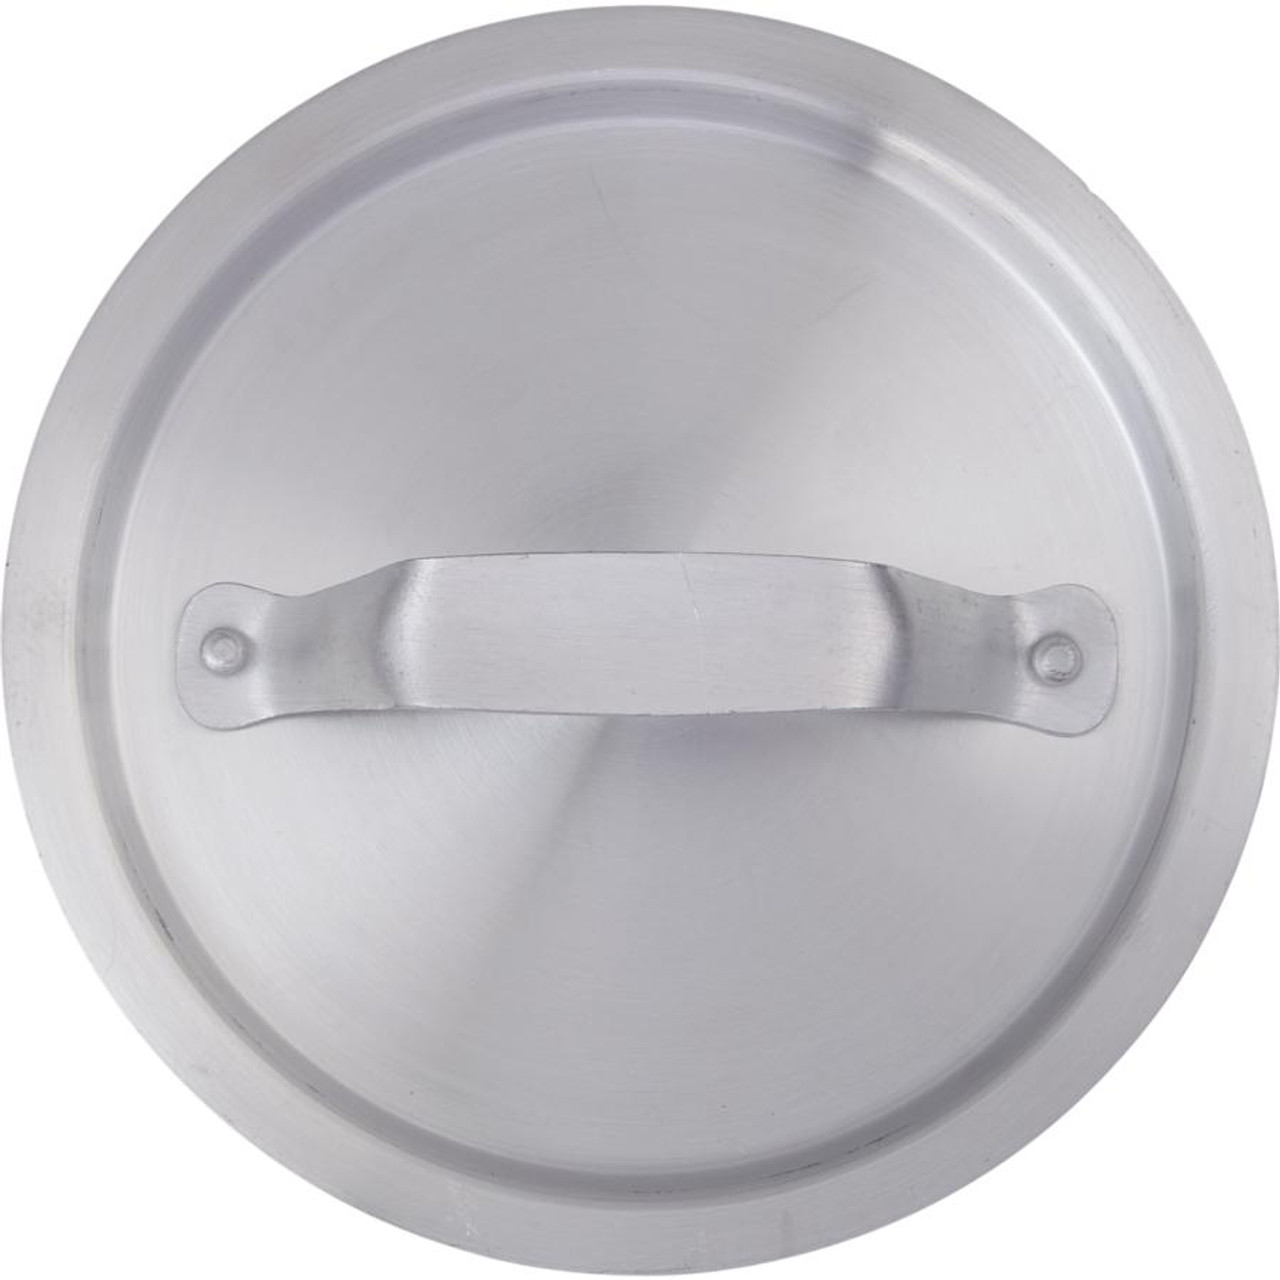 THERMALLOY Aluminium Sauce Pan Lid 6 Inches - Perfect Fit for Your Sauce Pan 